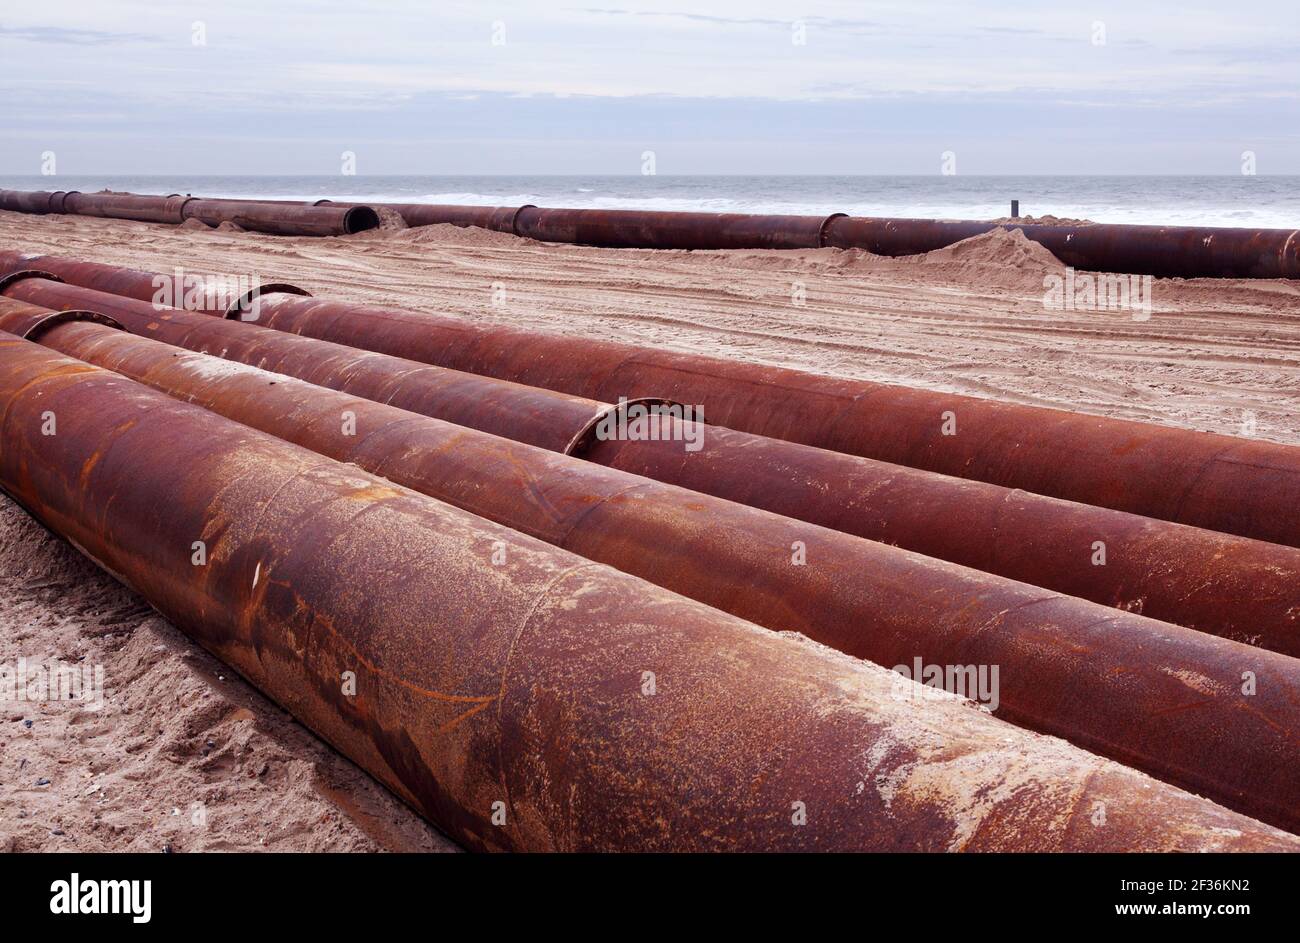 Large metal pipes or pipeline on Boscombe beach, Bournemouth. Used to  pump more sand onto beaches from offshore. Stock Photo